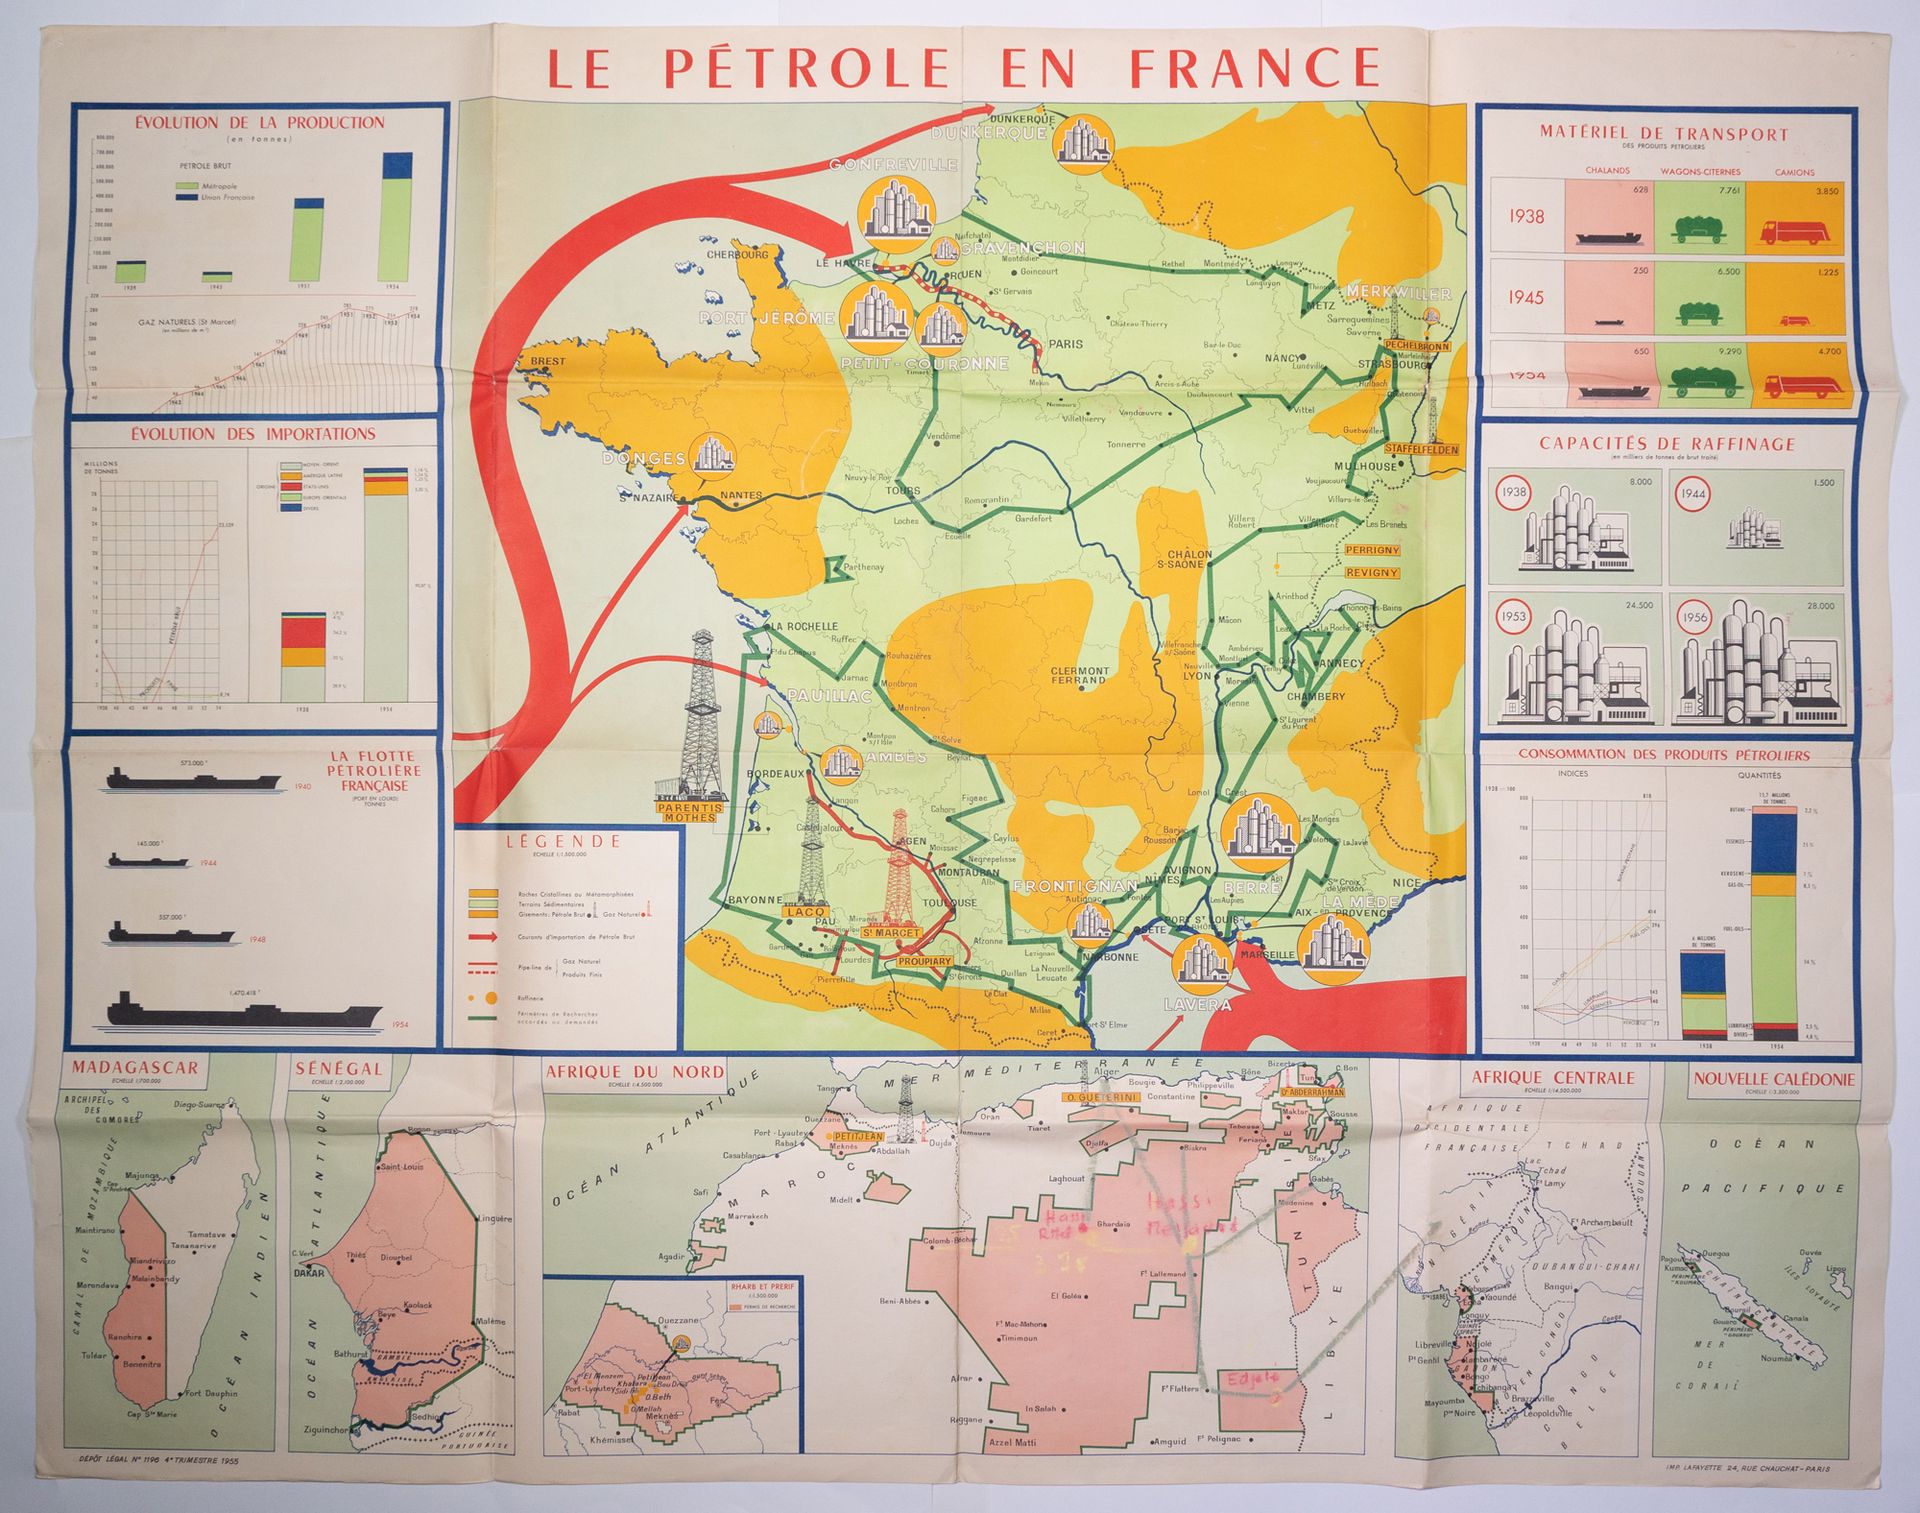 Null FRENCH OIL INDUSTRY. 1955 and 1962. 2 Indoor posters: "OIL IN FRANCE" Produ&hellip;